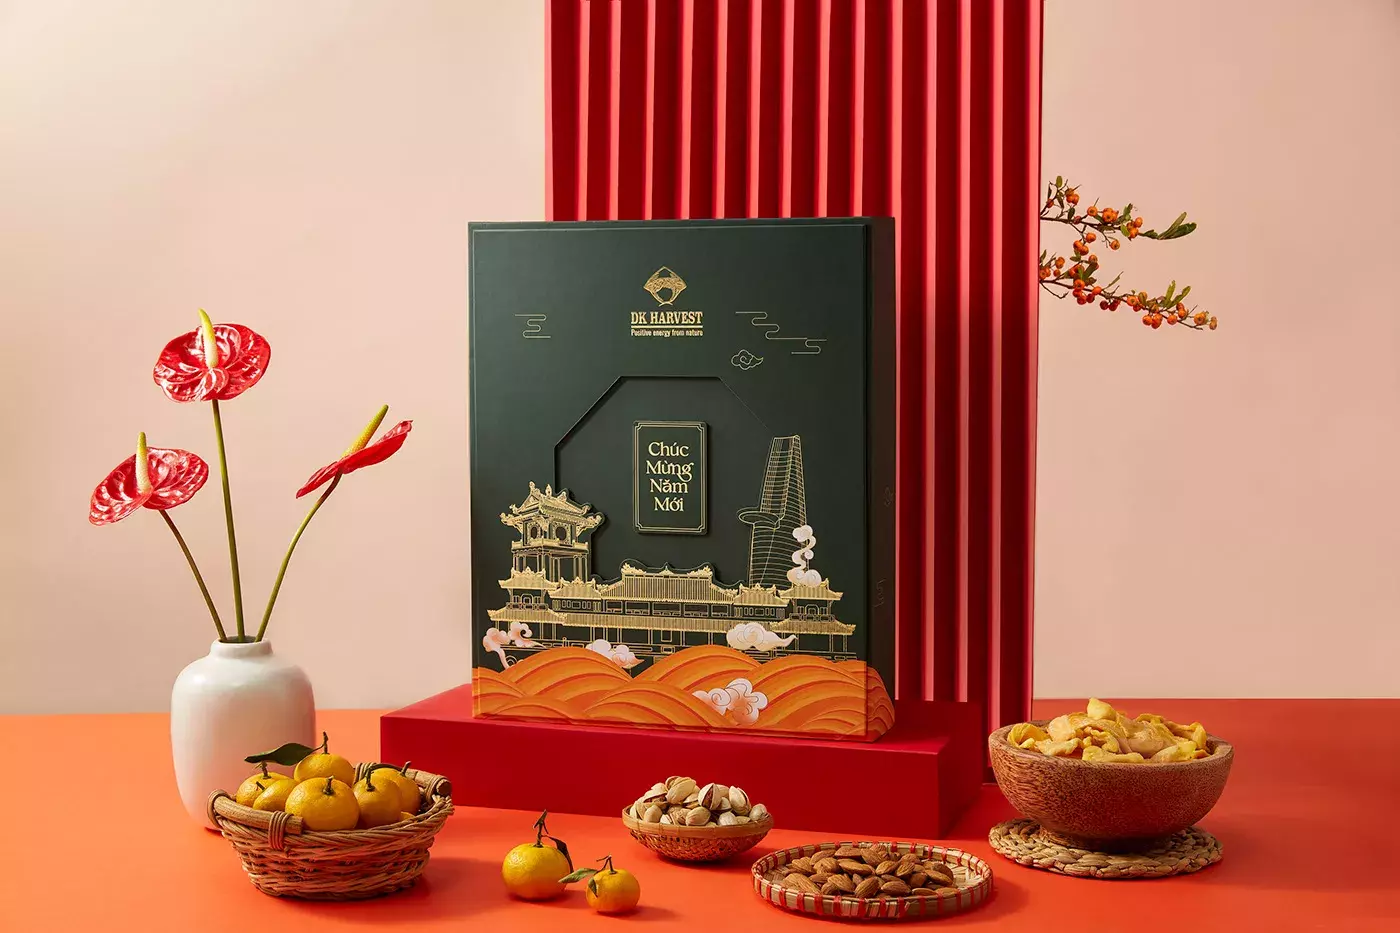 A Look at the beautiful packaging design for the Lunar New Year